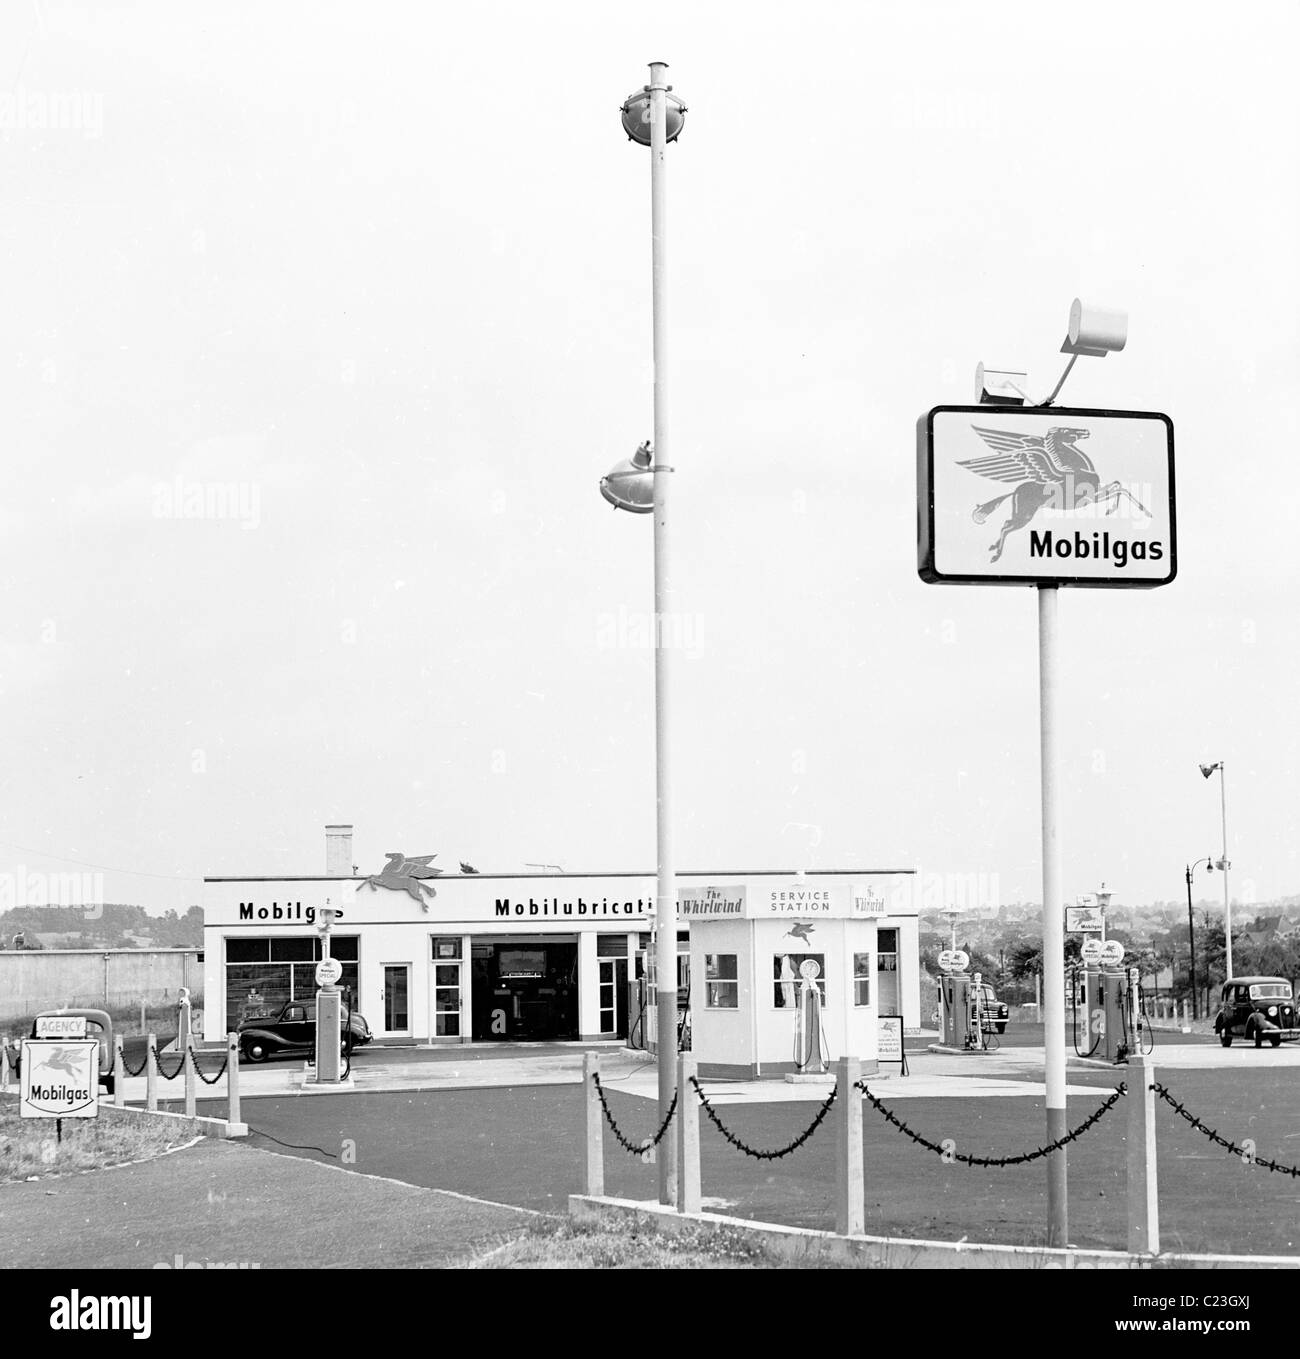 The forecourt and building of a 1950s Mobilgas service station 'The Whirlwind' in this historical picture from J Allan Cash. Stock Photo